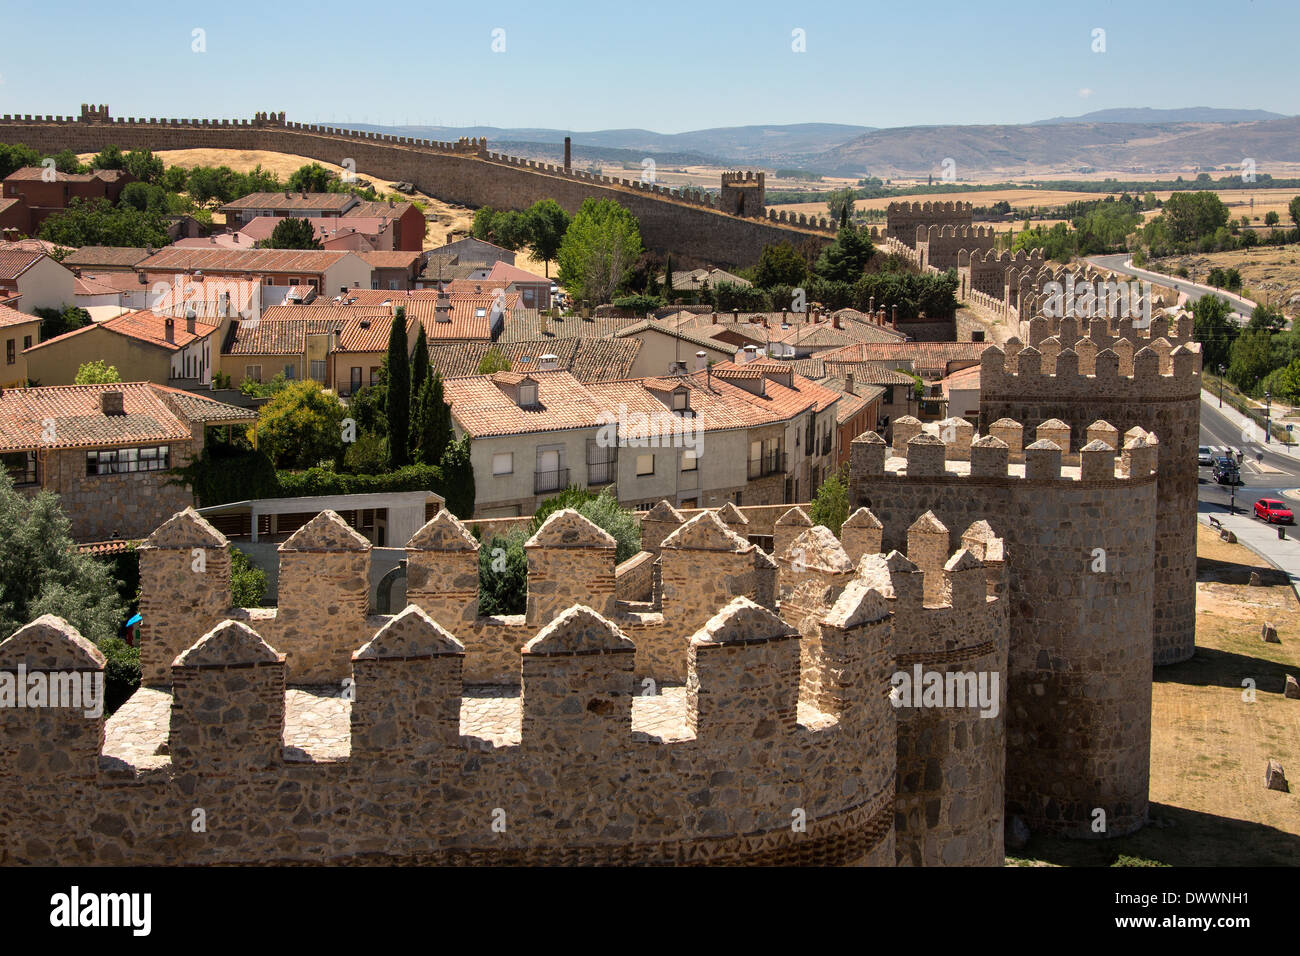 The medieval city walls and the city of Avila in the Castilla-y-Leon region of central Spain. Stock Photo